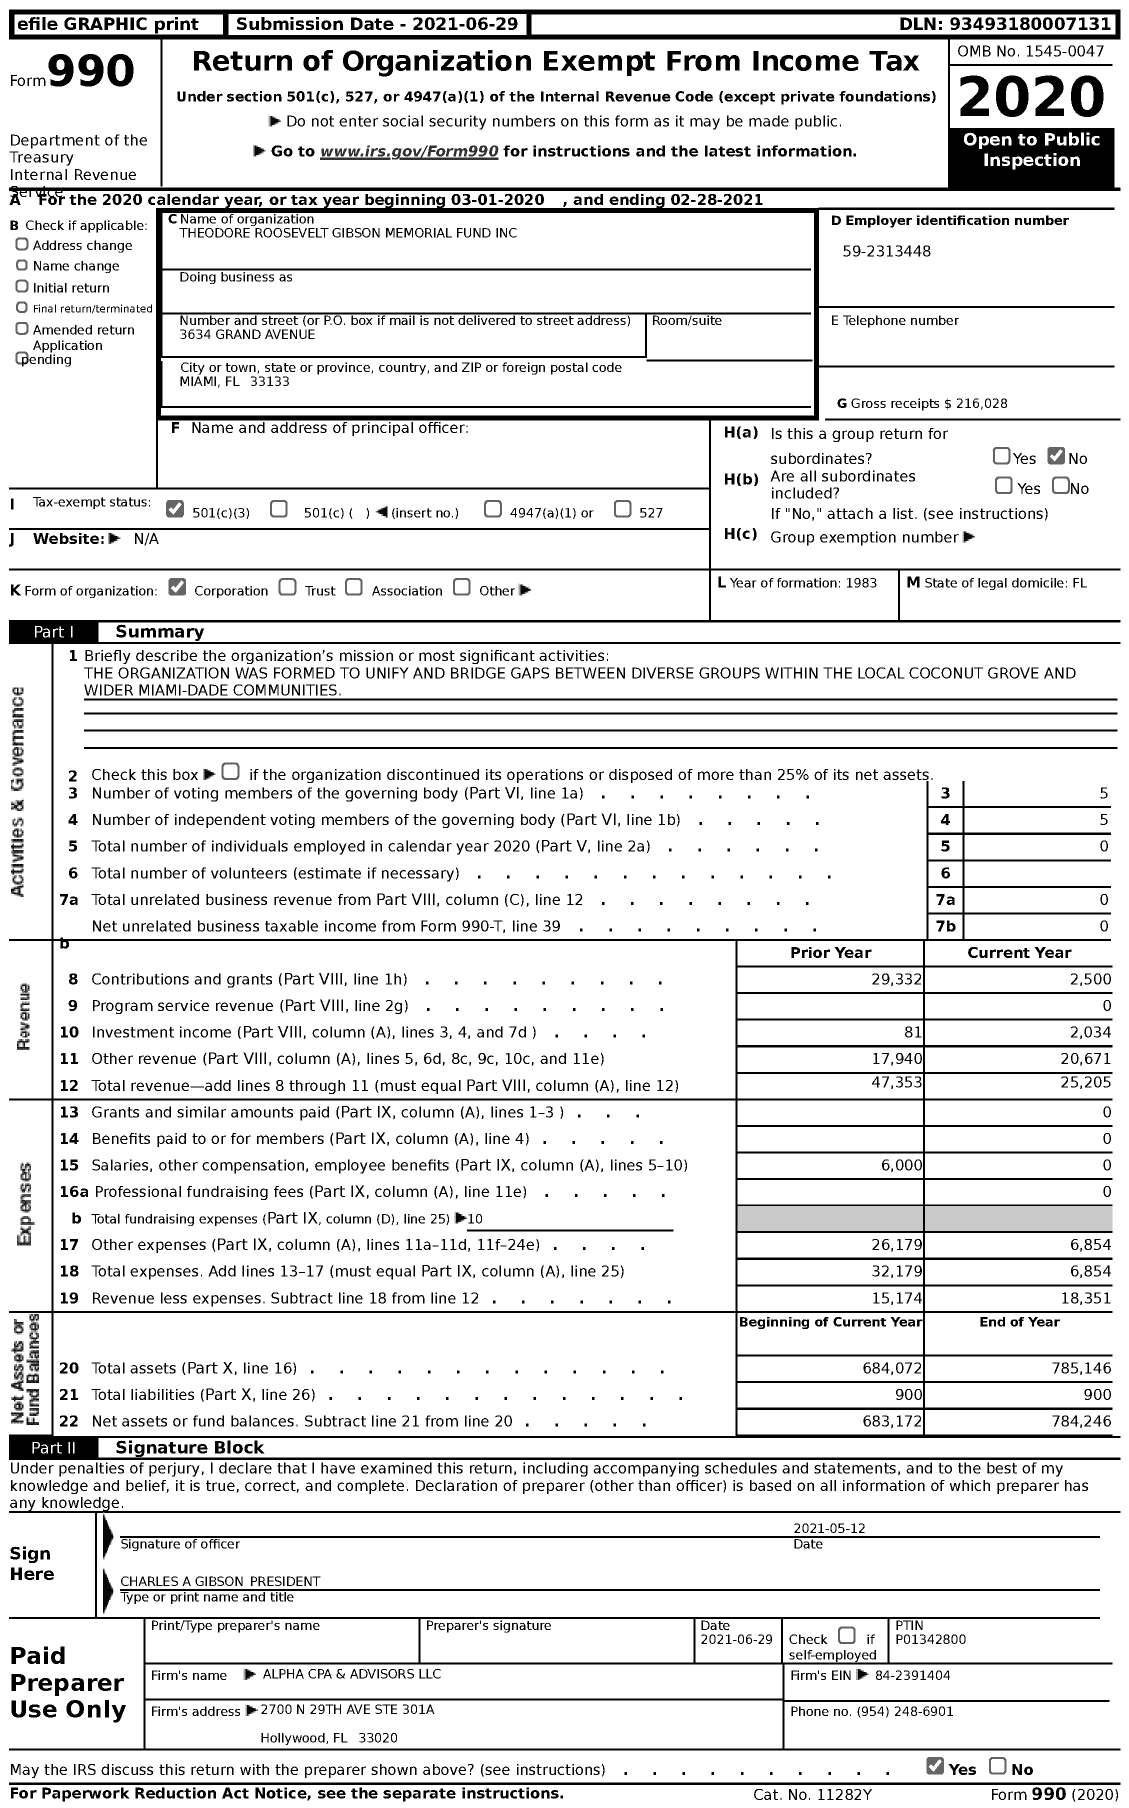 Image of first page of 2020 Form 990 for Theodore Roosevelt Gibson Memorial Fund